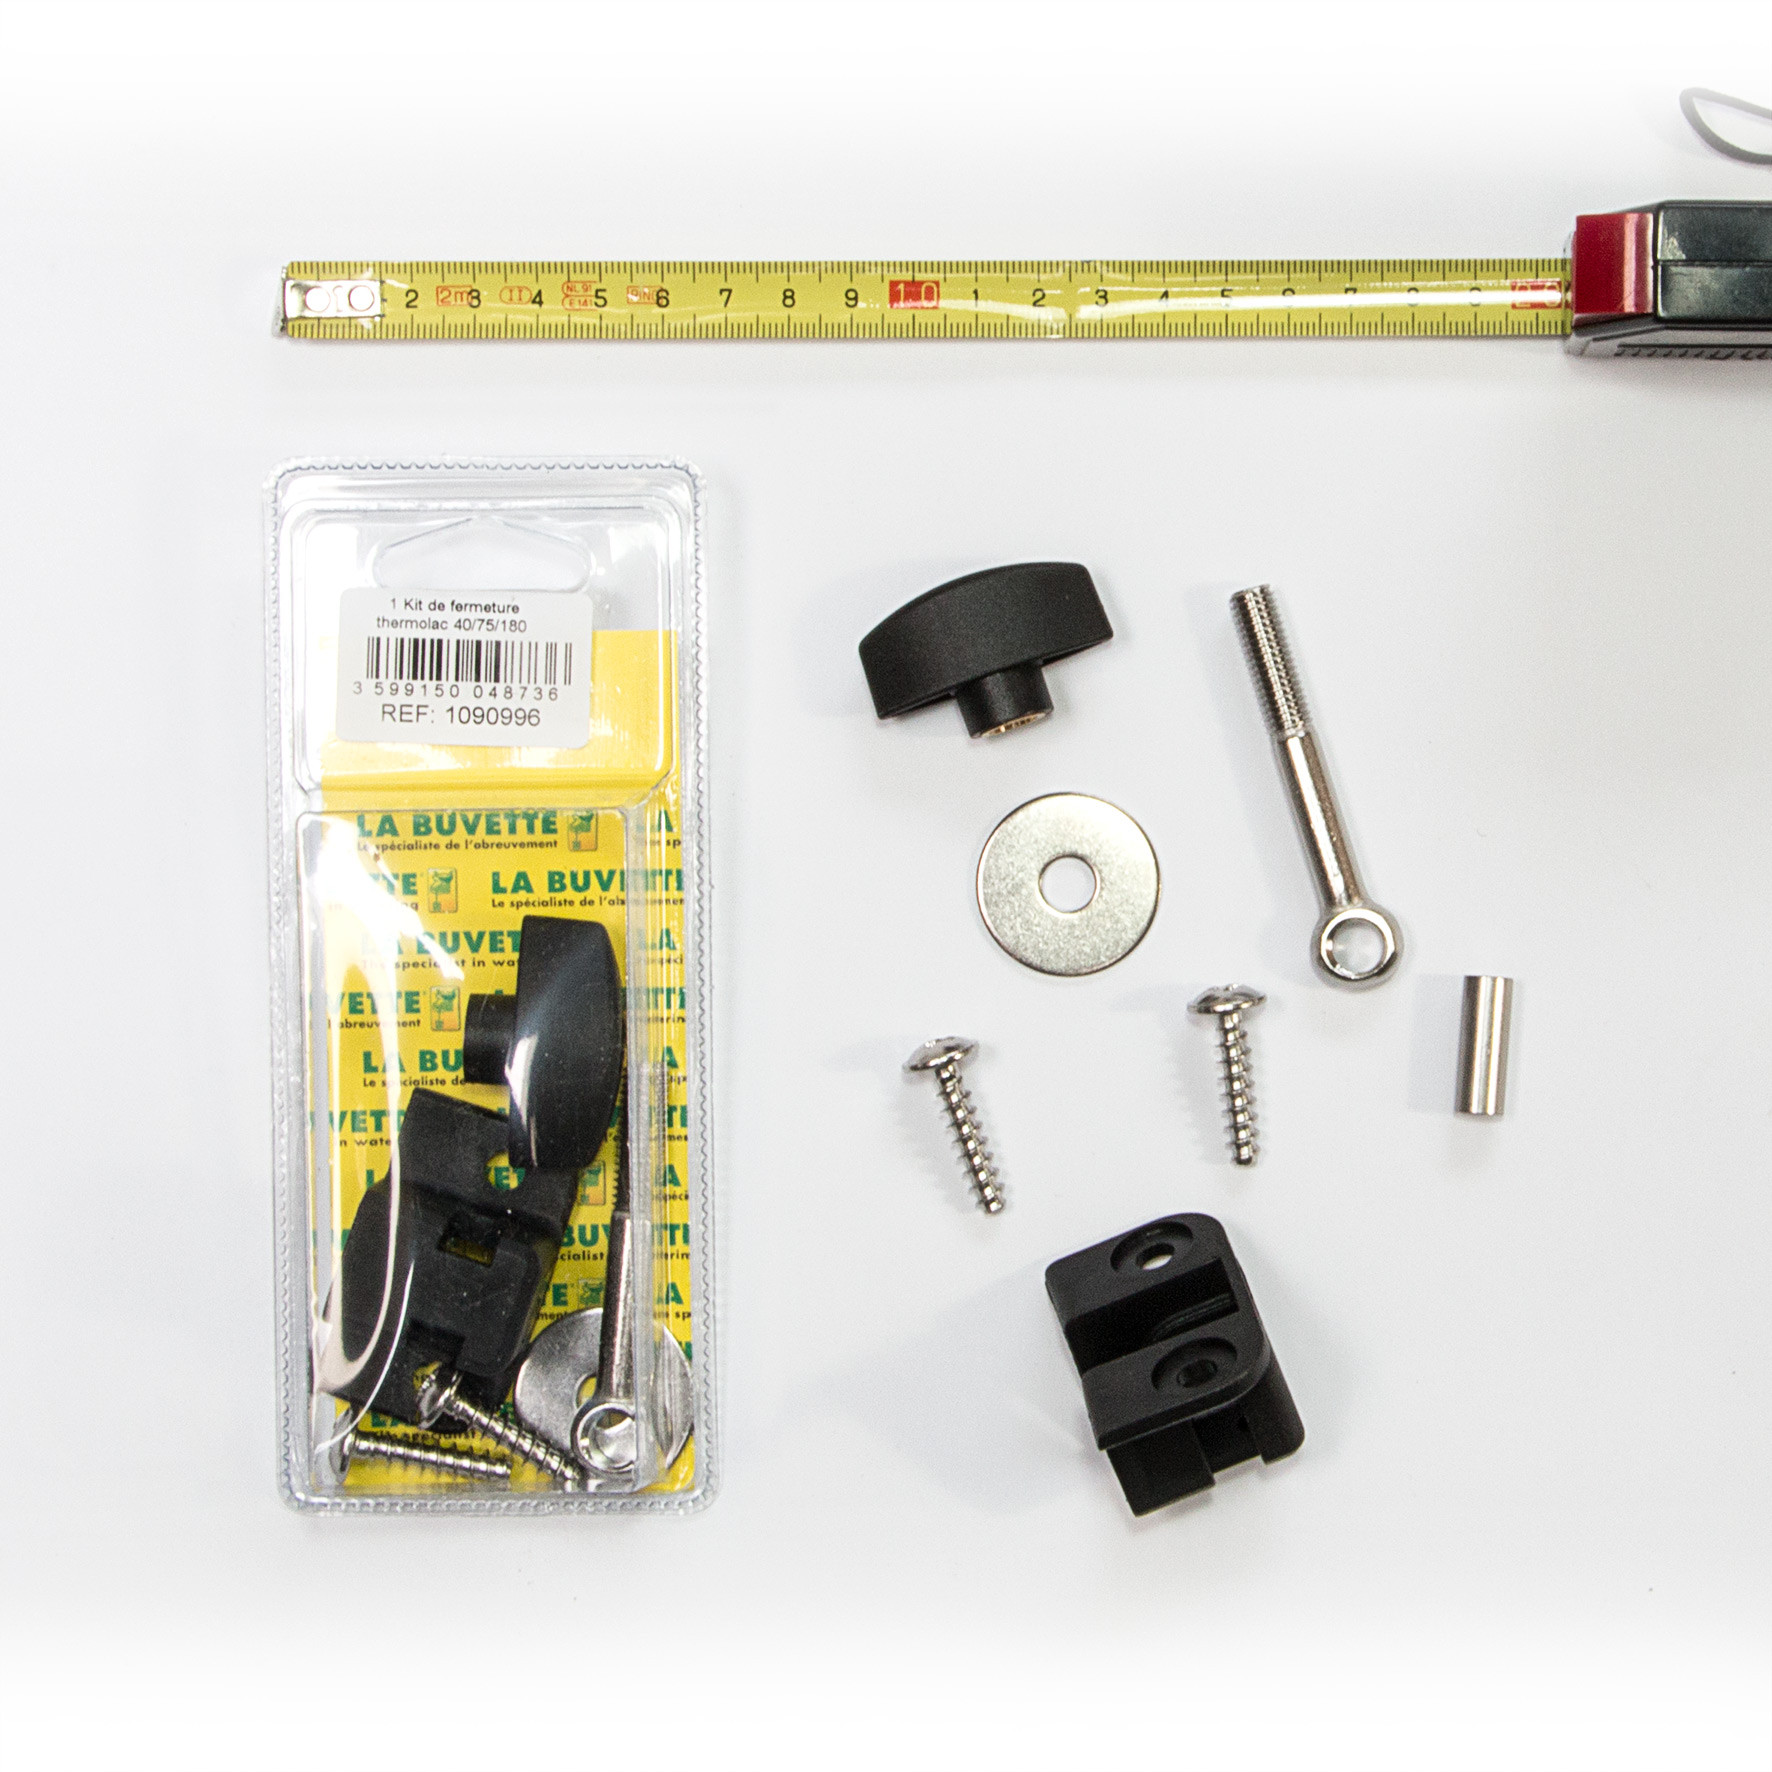 CLOSING KIT FOR THERMOLAC 40/75/180